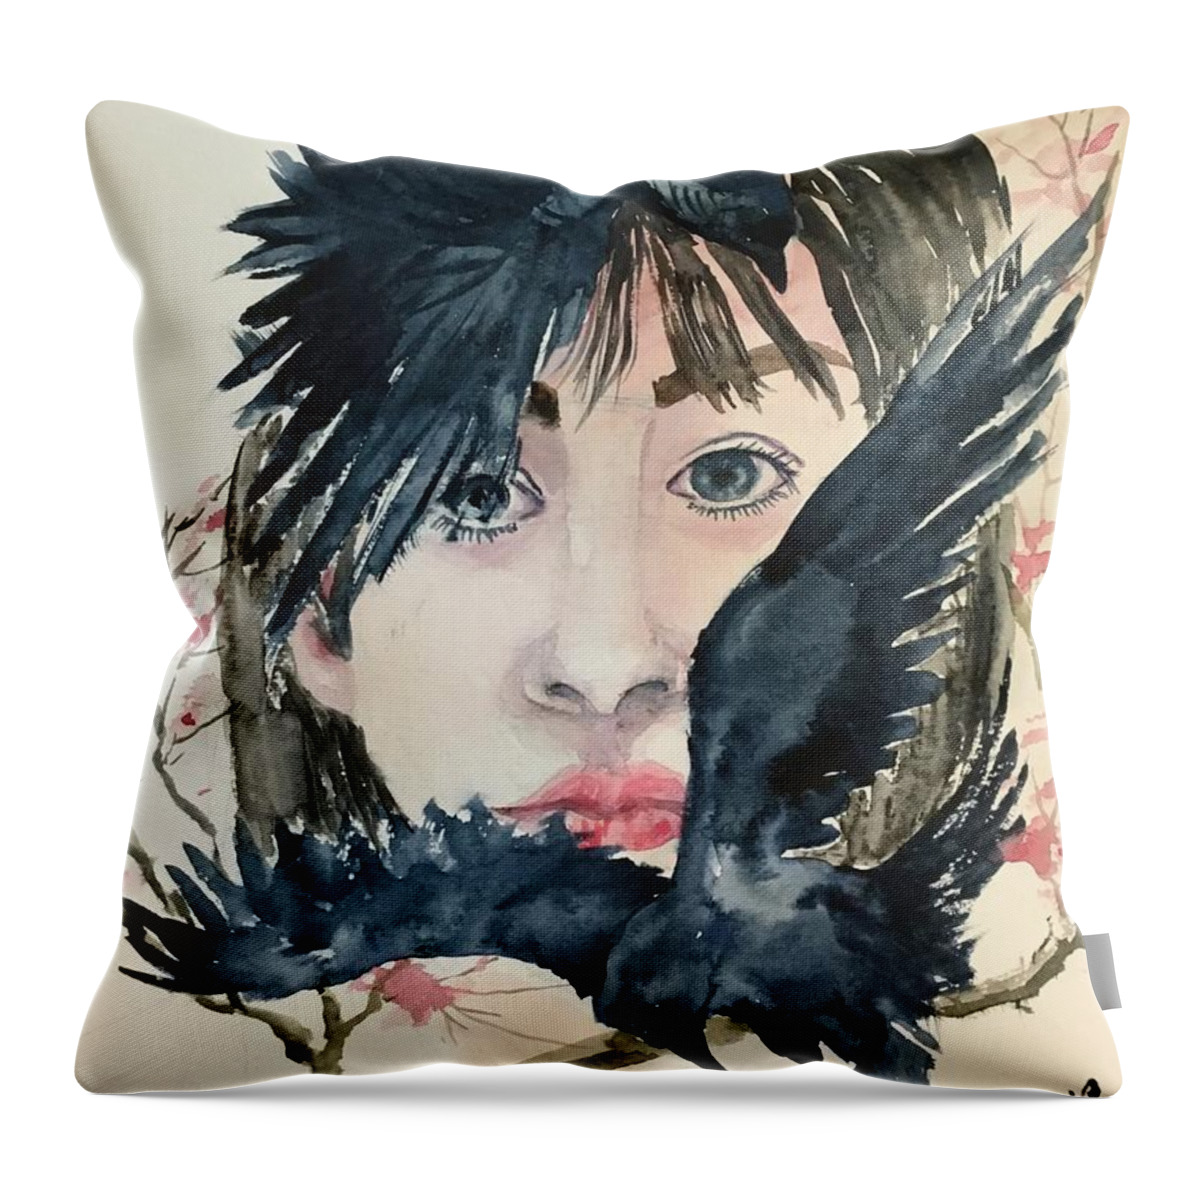 1102019 Throw Pillow featuring the painting 1102019 by Han in Huang wong